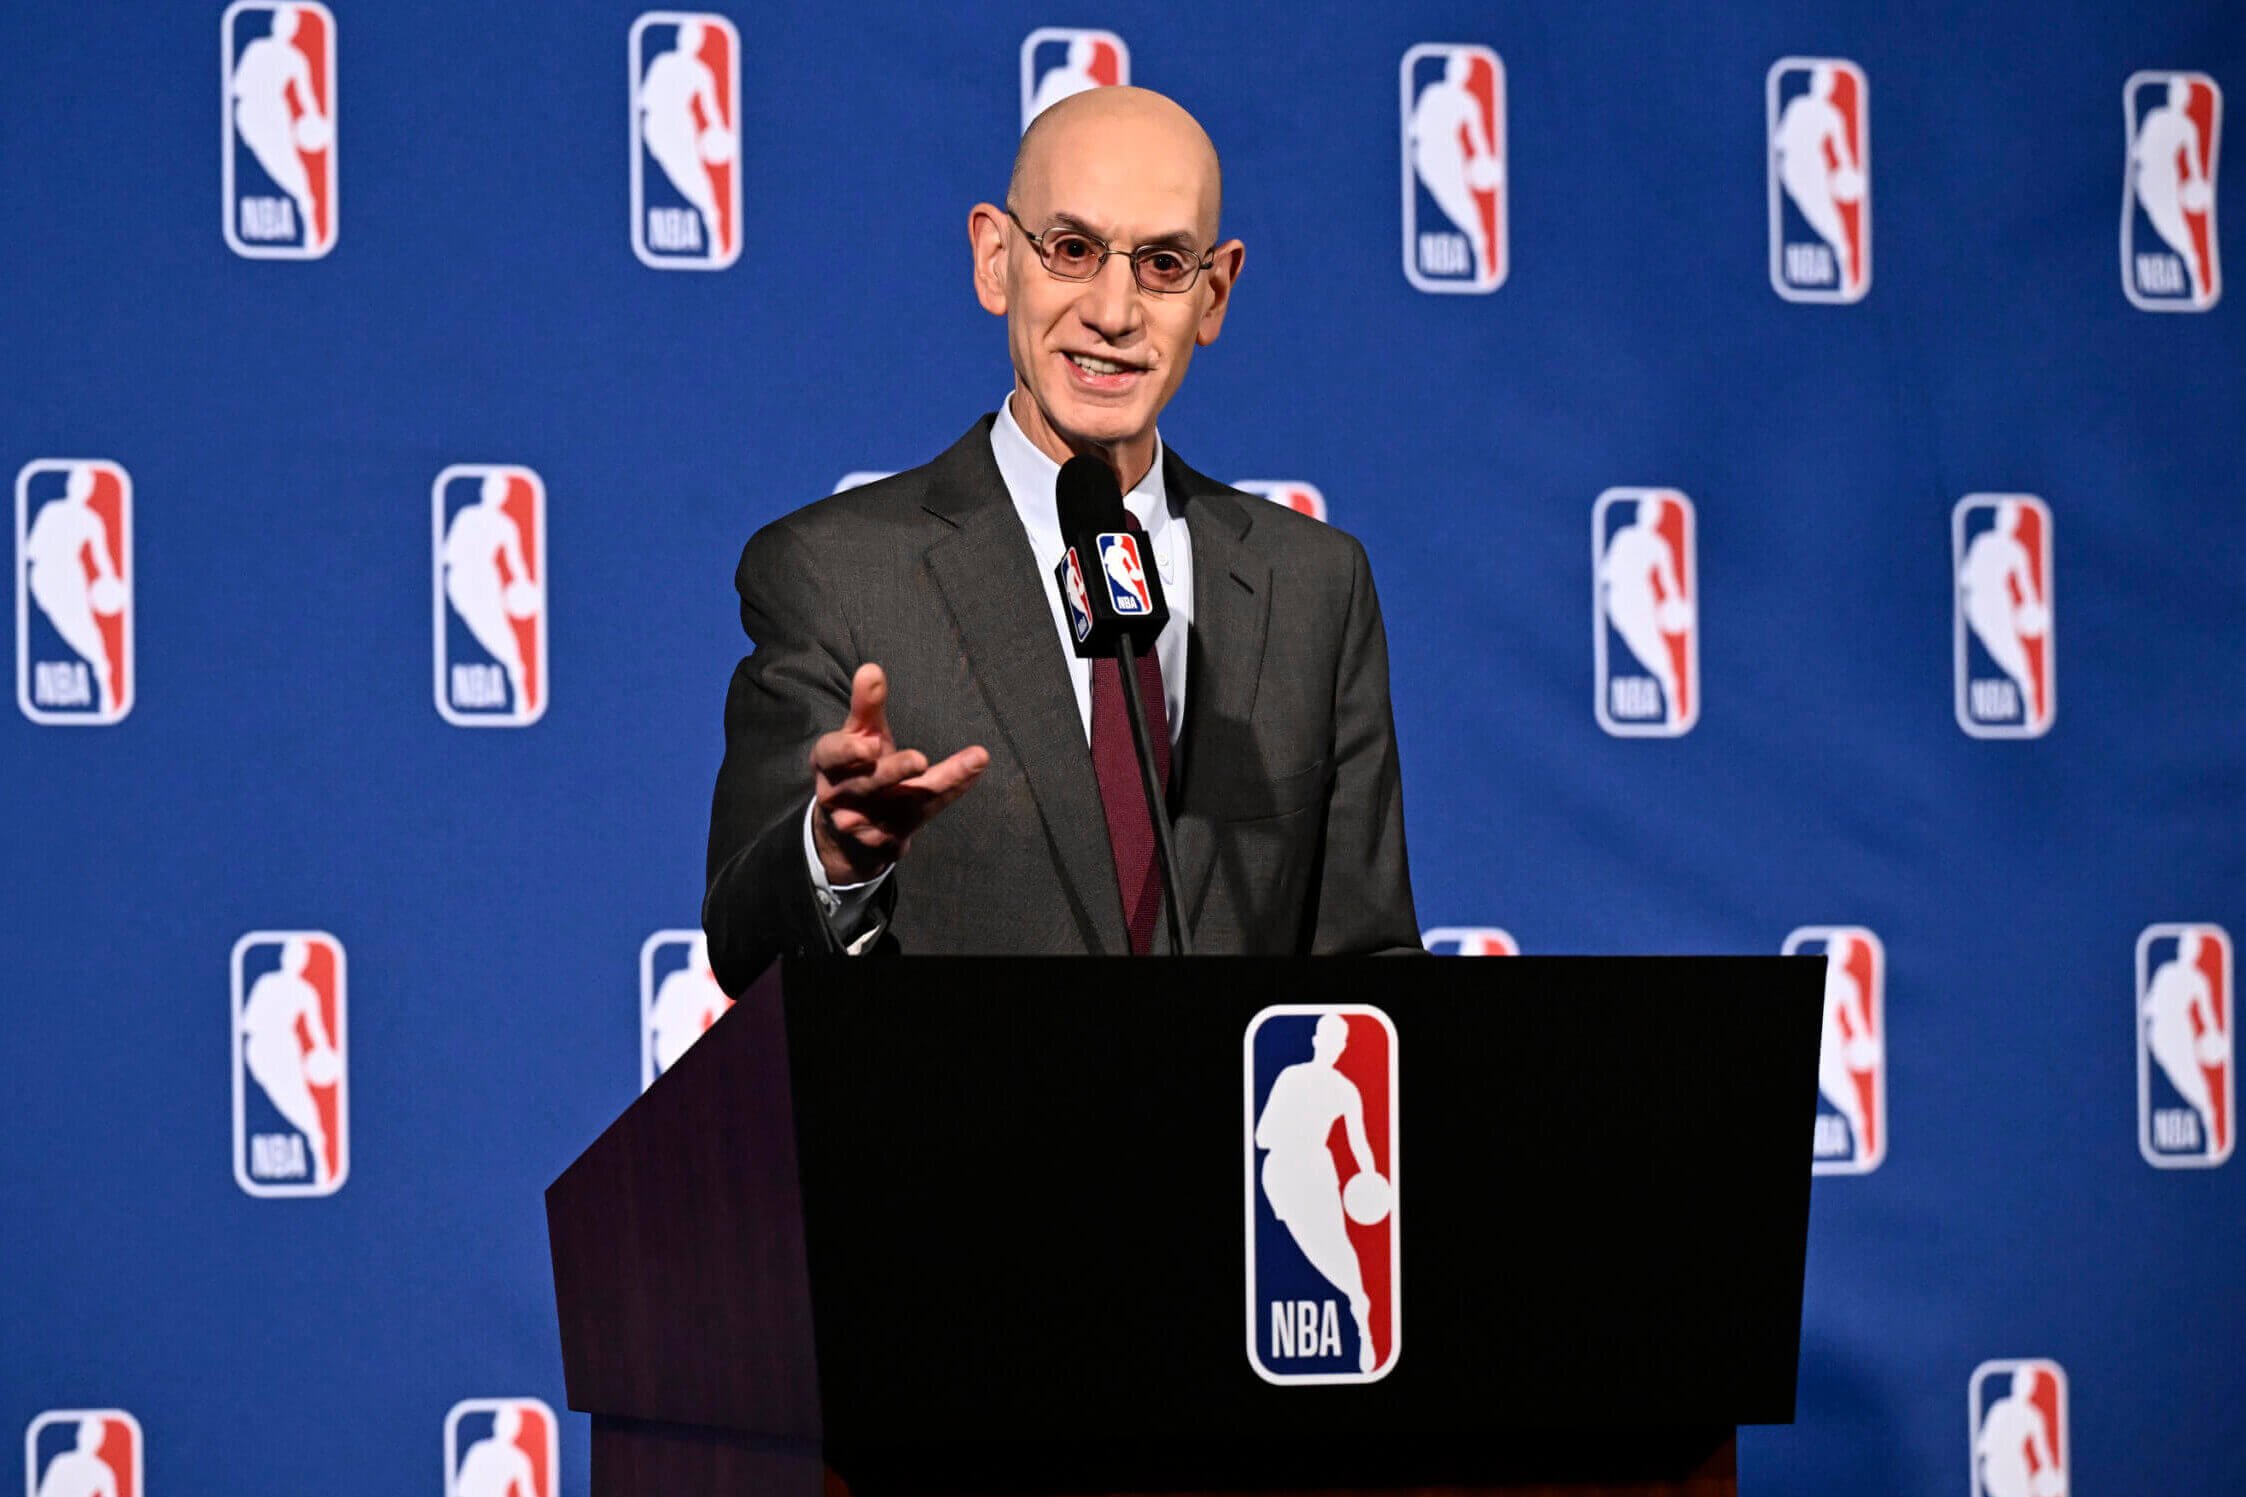 Amazon Prime has framework deal for NBA broadcast rights, per sources, putting pressure on TNT, NBC